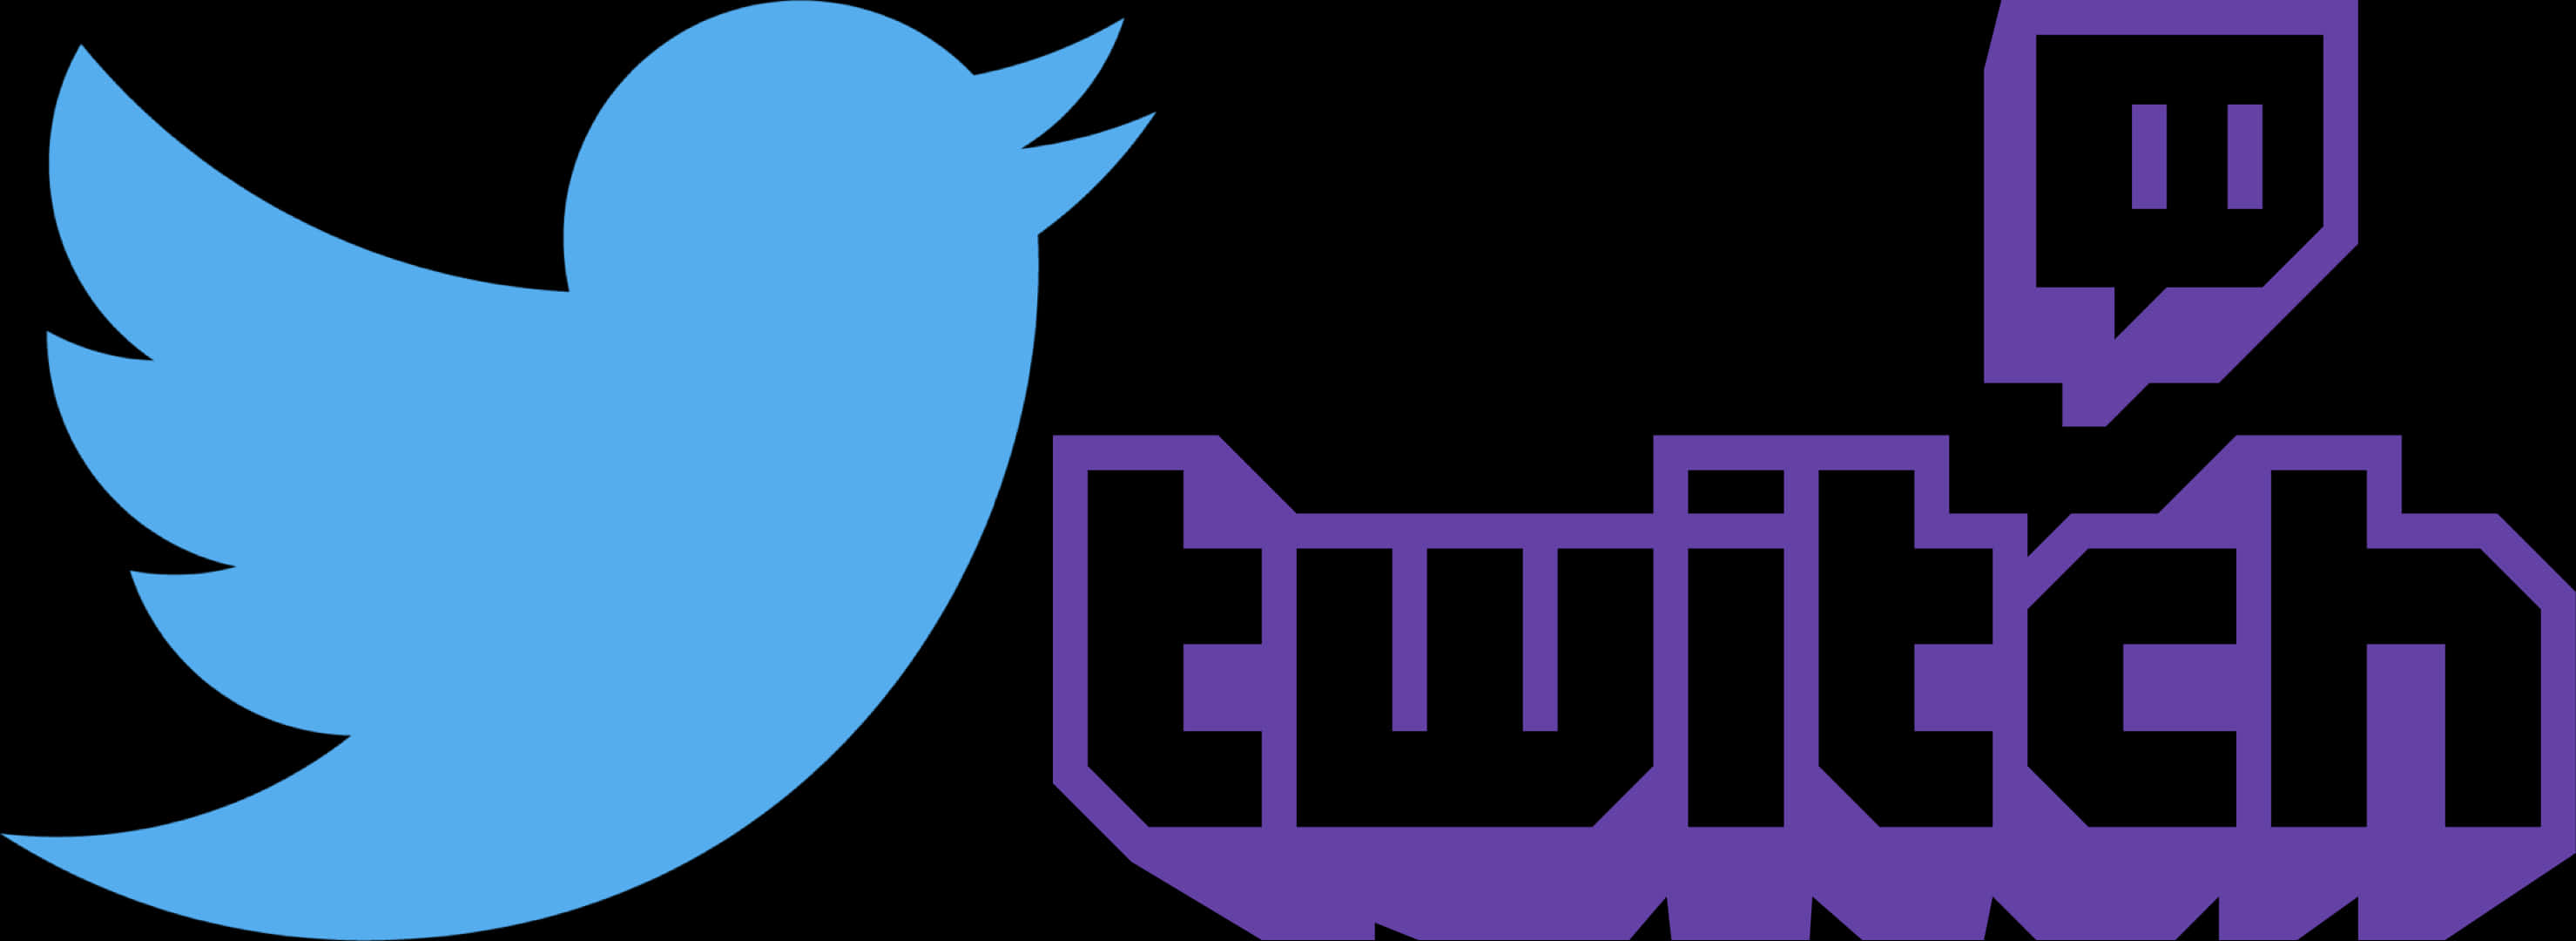 Twitter Twitch Logos Combined